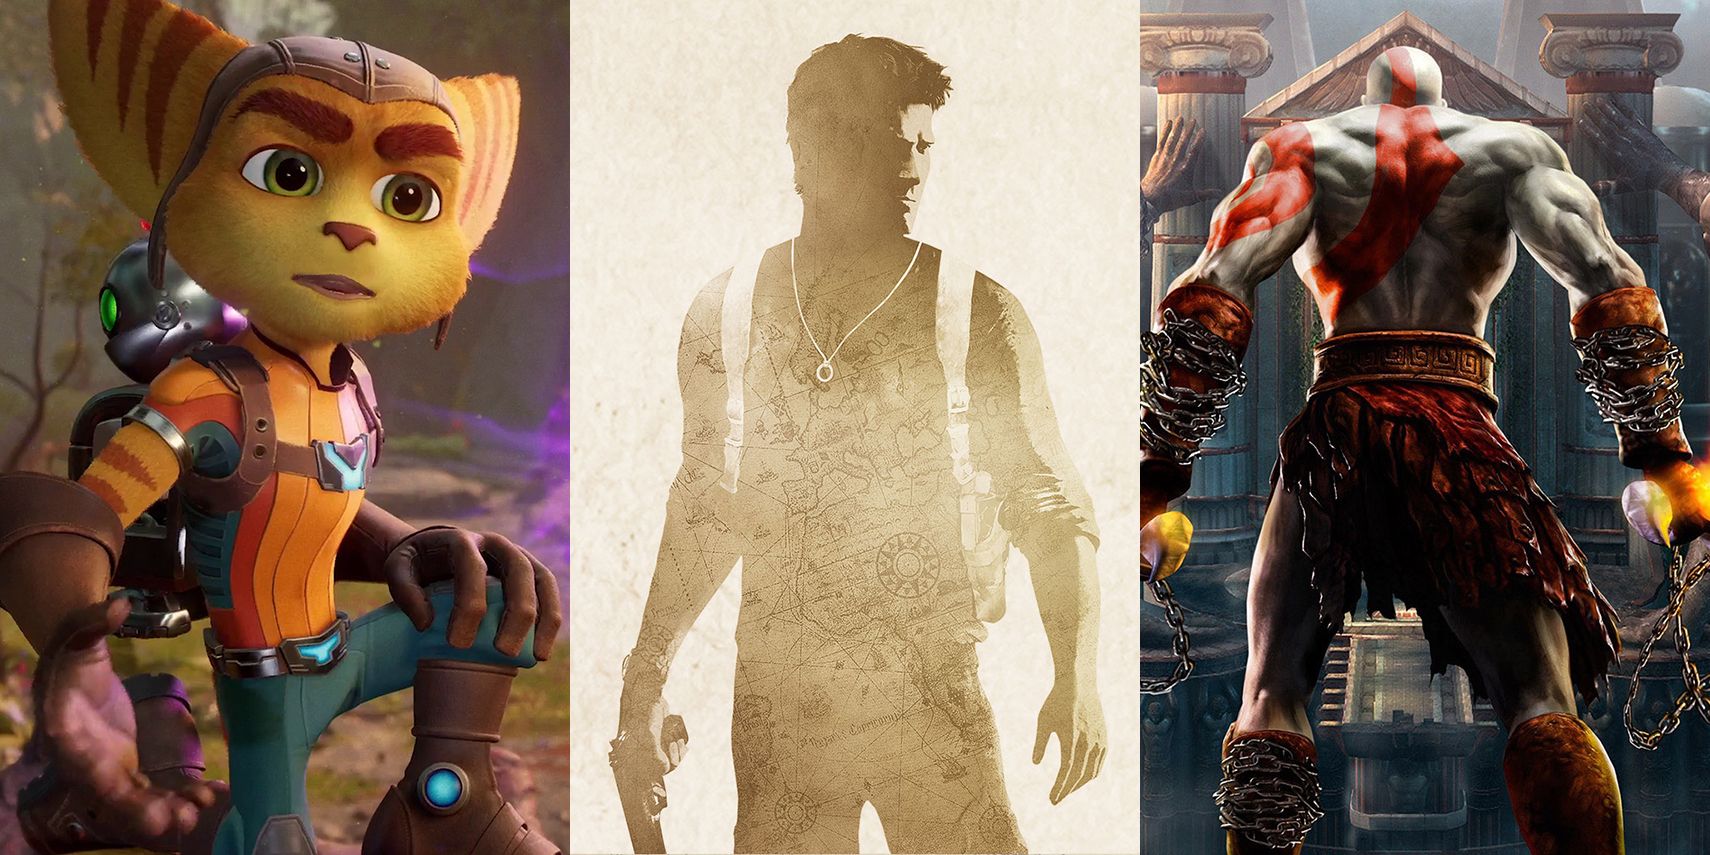 Split image of PlayStation franchises Ratchet and Clank, Uncharted, and God of War.